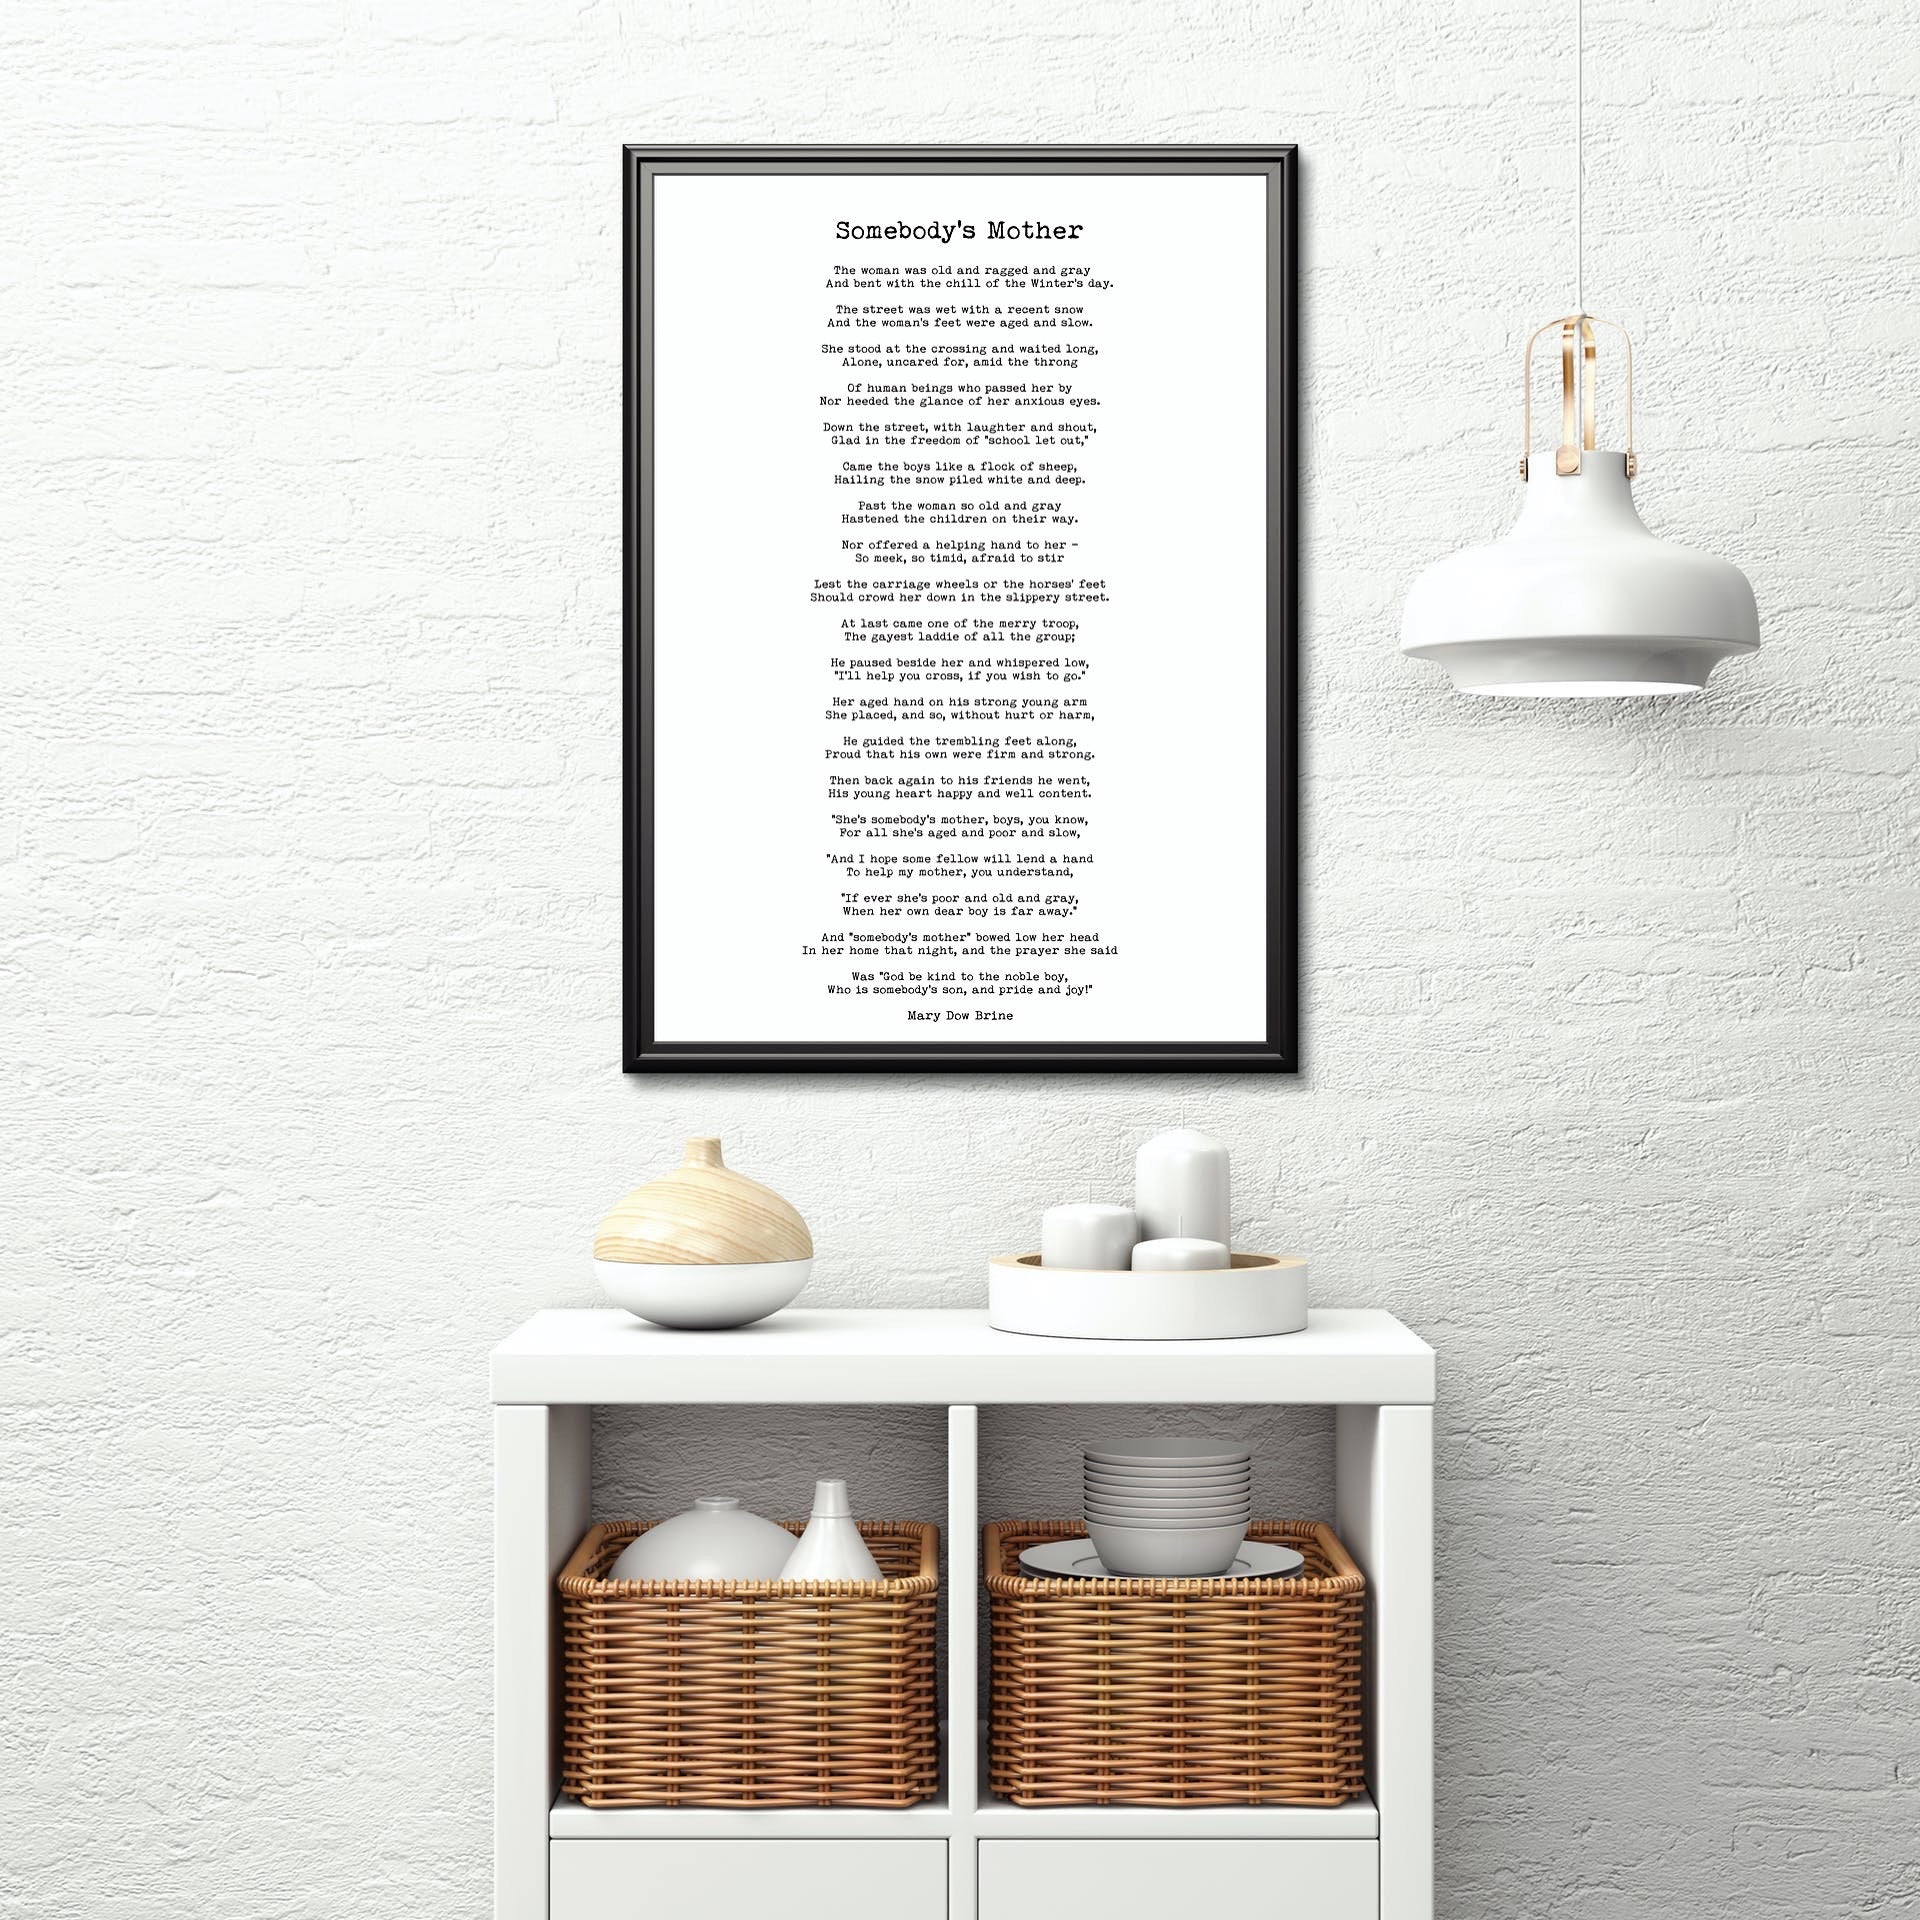 Somebody's Mother Mary Dow Brine Poem Wall Art Print in Black & White, Unframed and Framed Art